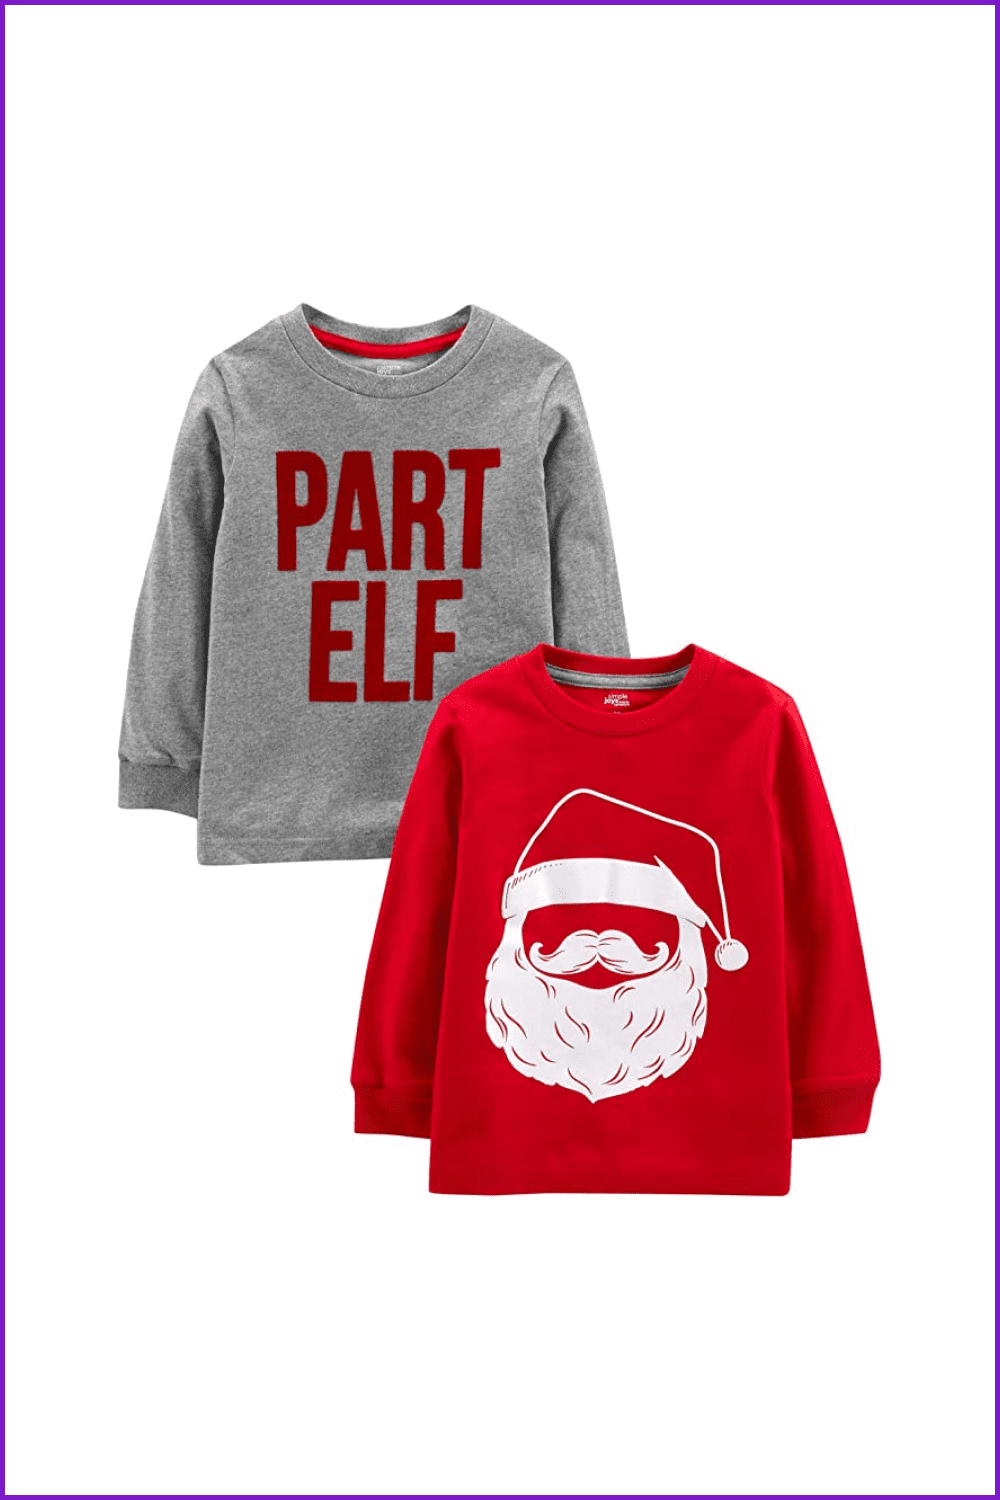 Long sleeves with the phrase Part elf and the shape of Santa Claus.